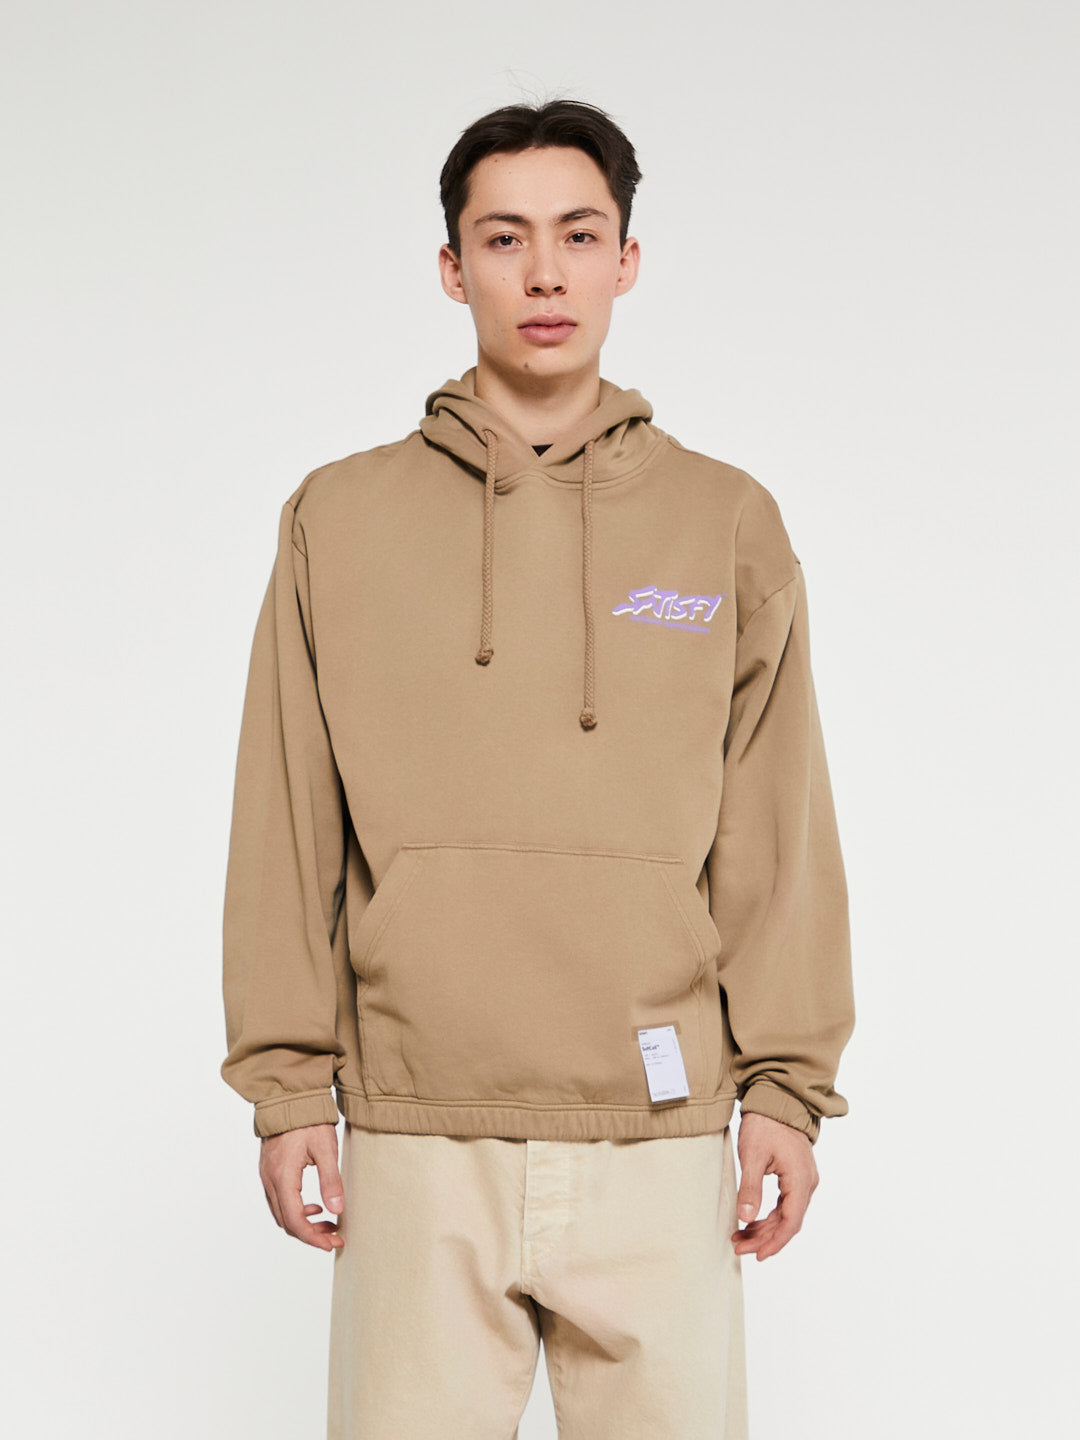 Satisfy - SoftCell Hoodie in Brown